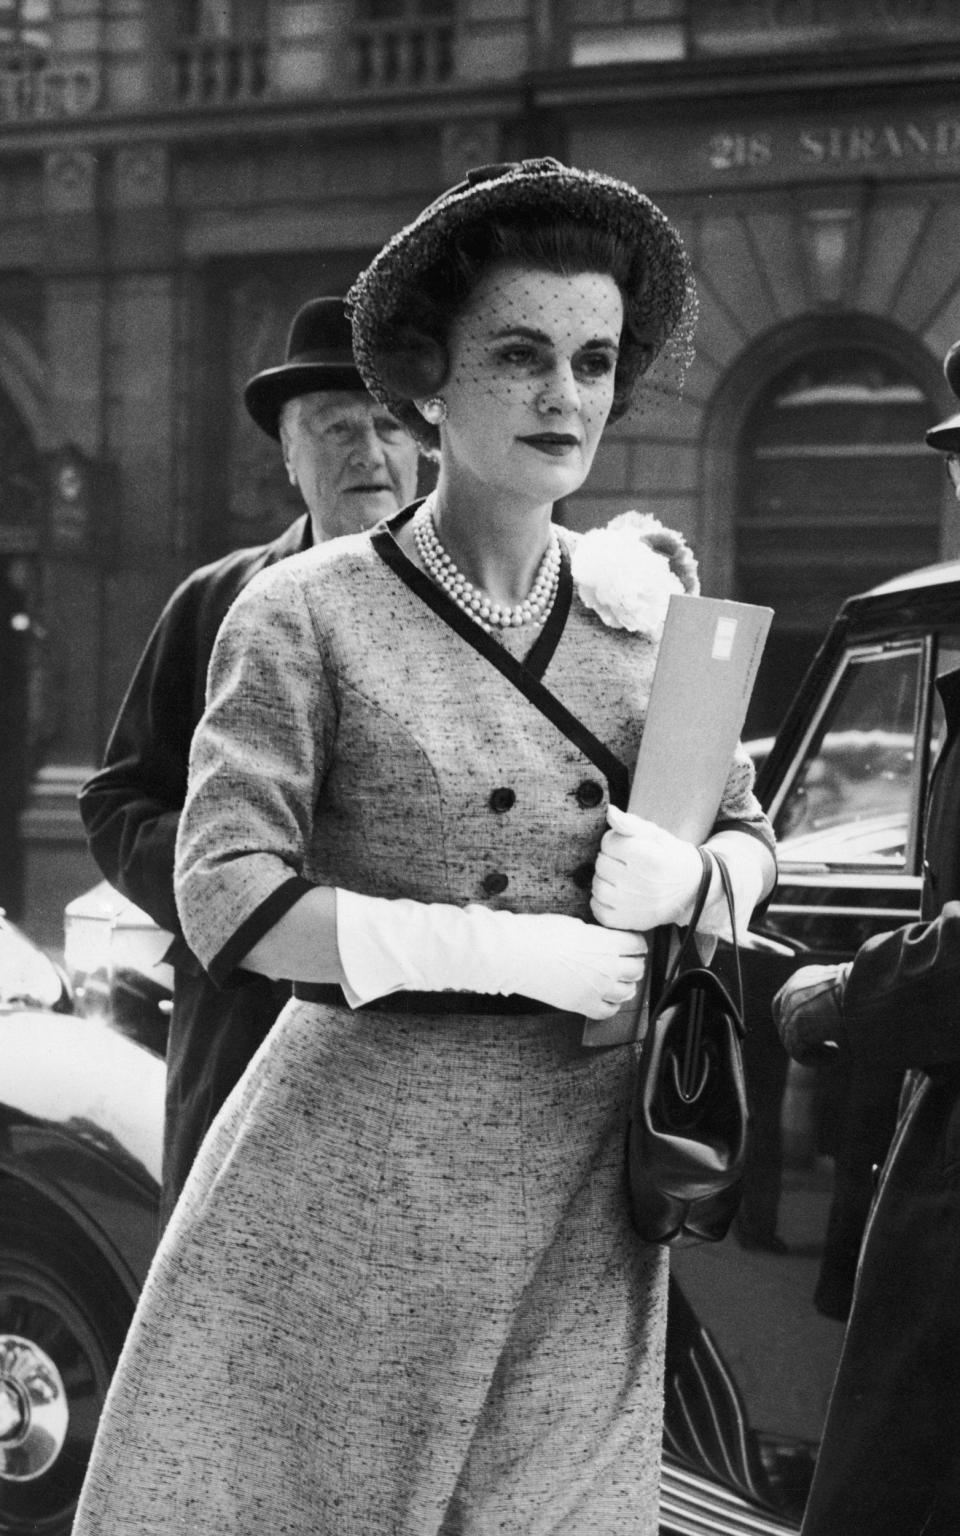 Outside the law courts in the Strand on the second day of her case in 1960 - Central Press